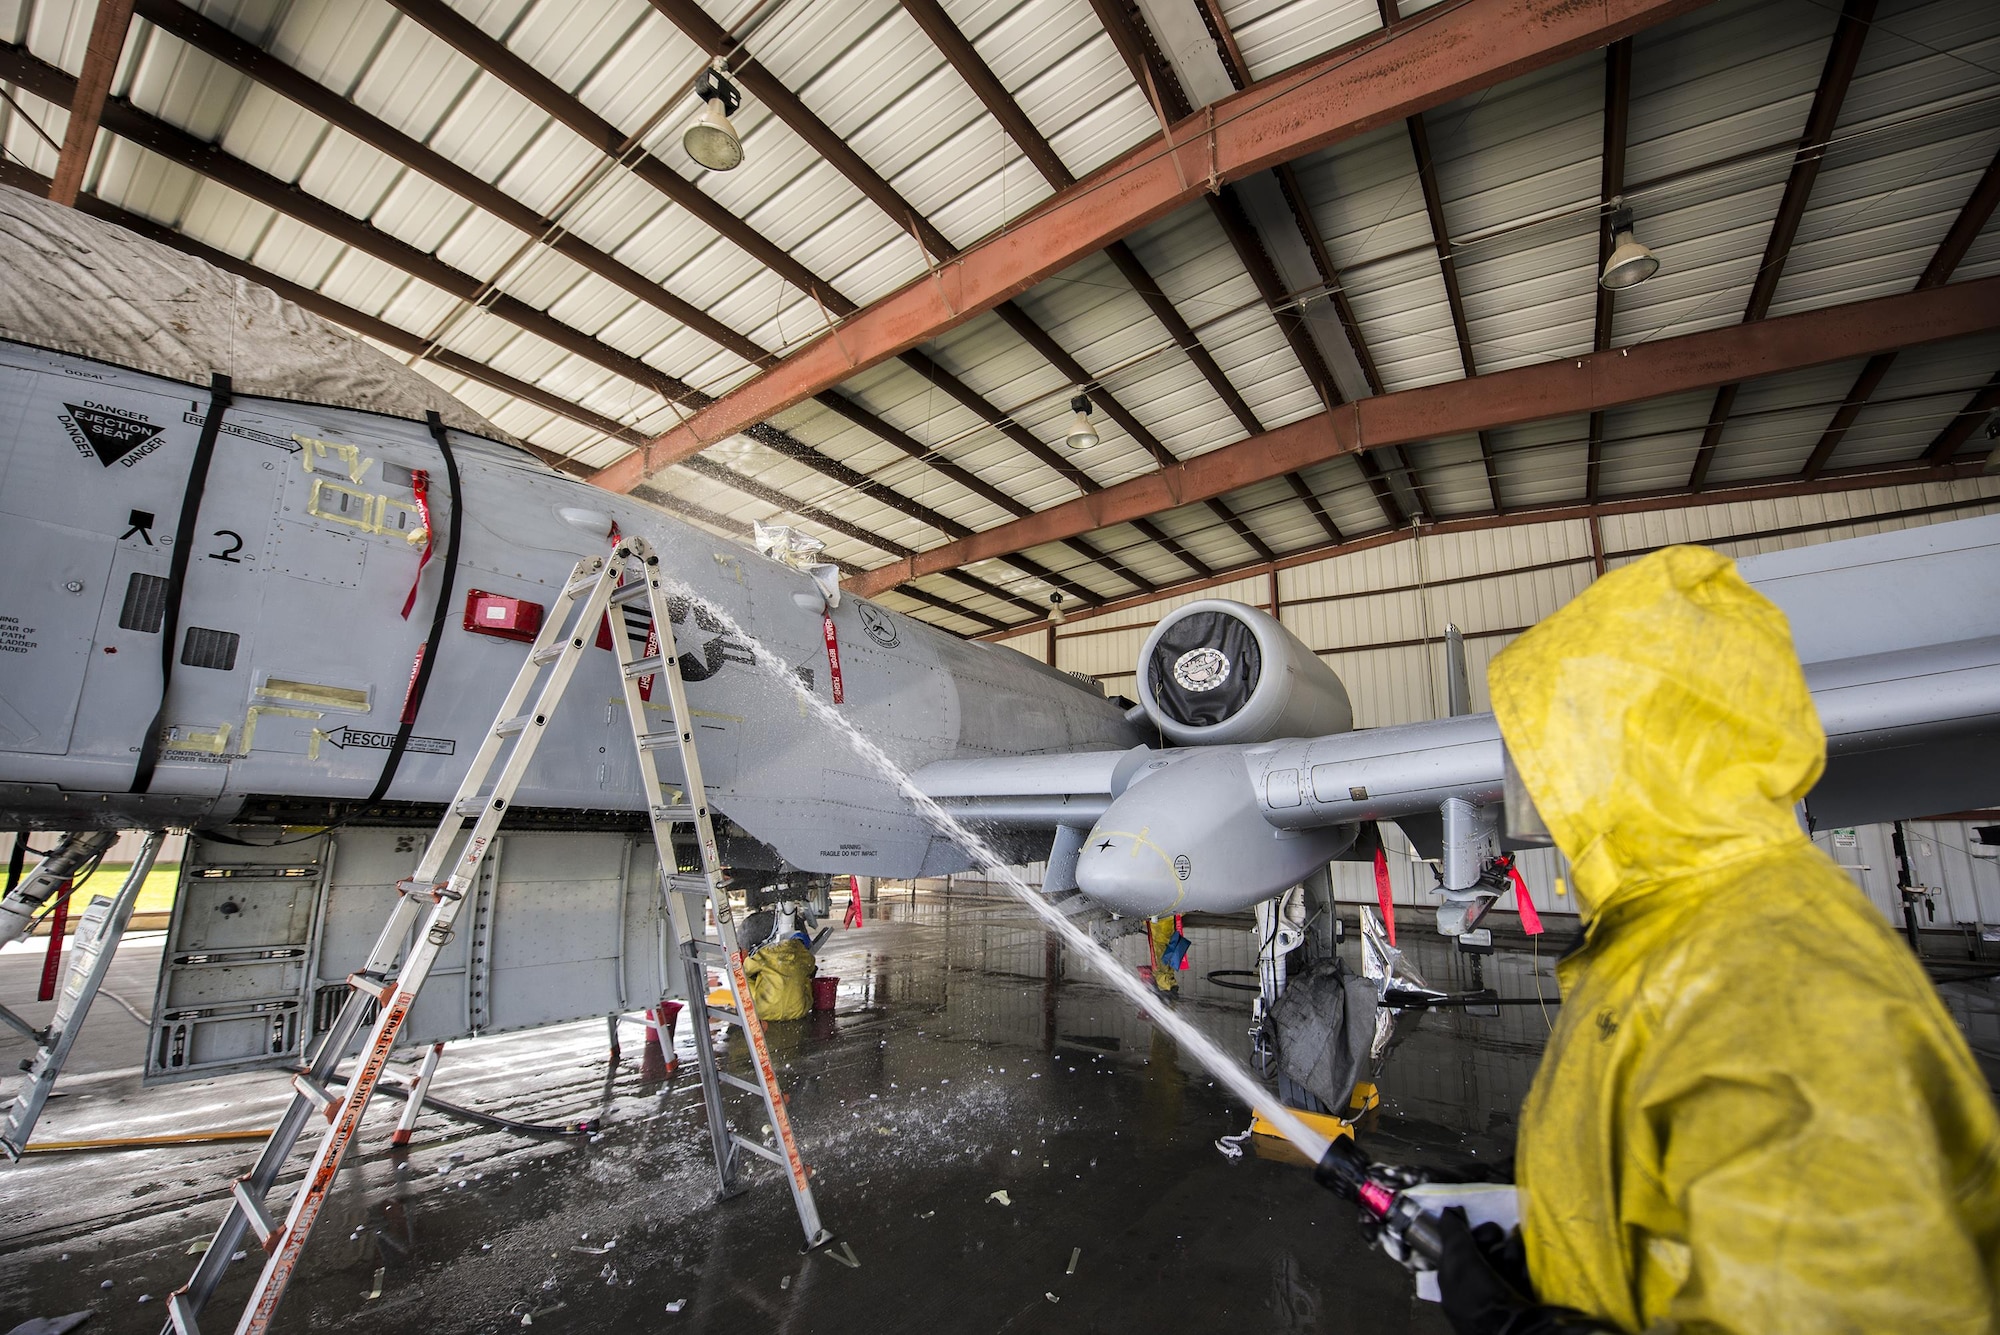 A U.S. Air Force Airman from the 23d Aircraft Maintenance Squadron washes an A-10C Thunderbolt II, June 16, 2016, at Moody Air Force Base, Ga. Maintenance procedures require that the A-10s are washed at least every 180 days. (U.S. Air Force photo by Airman Daniel Snider/Released)